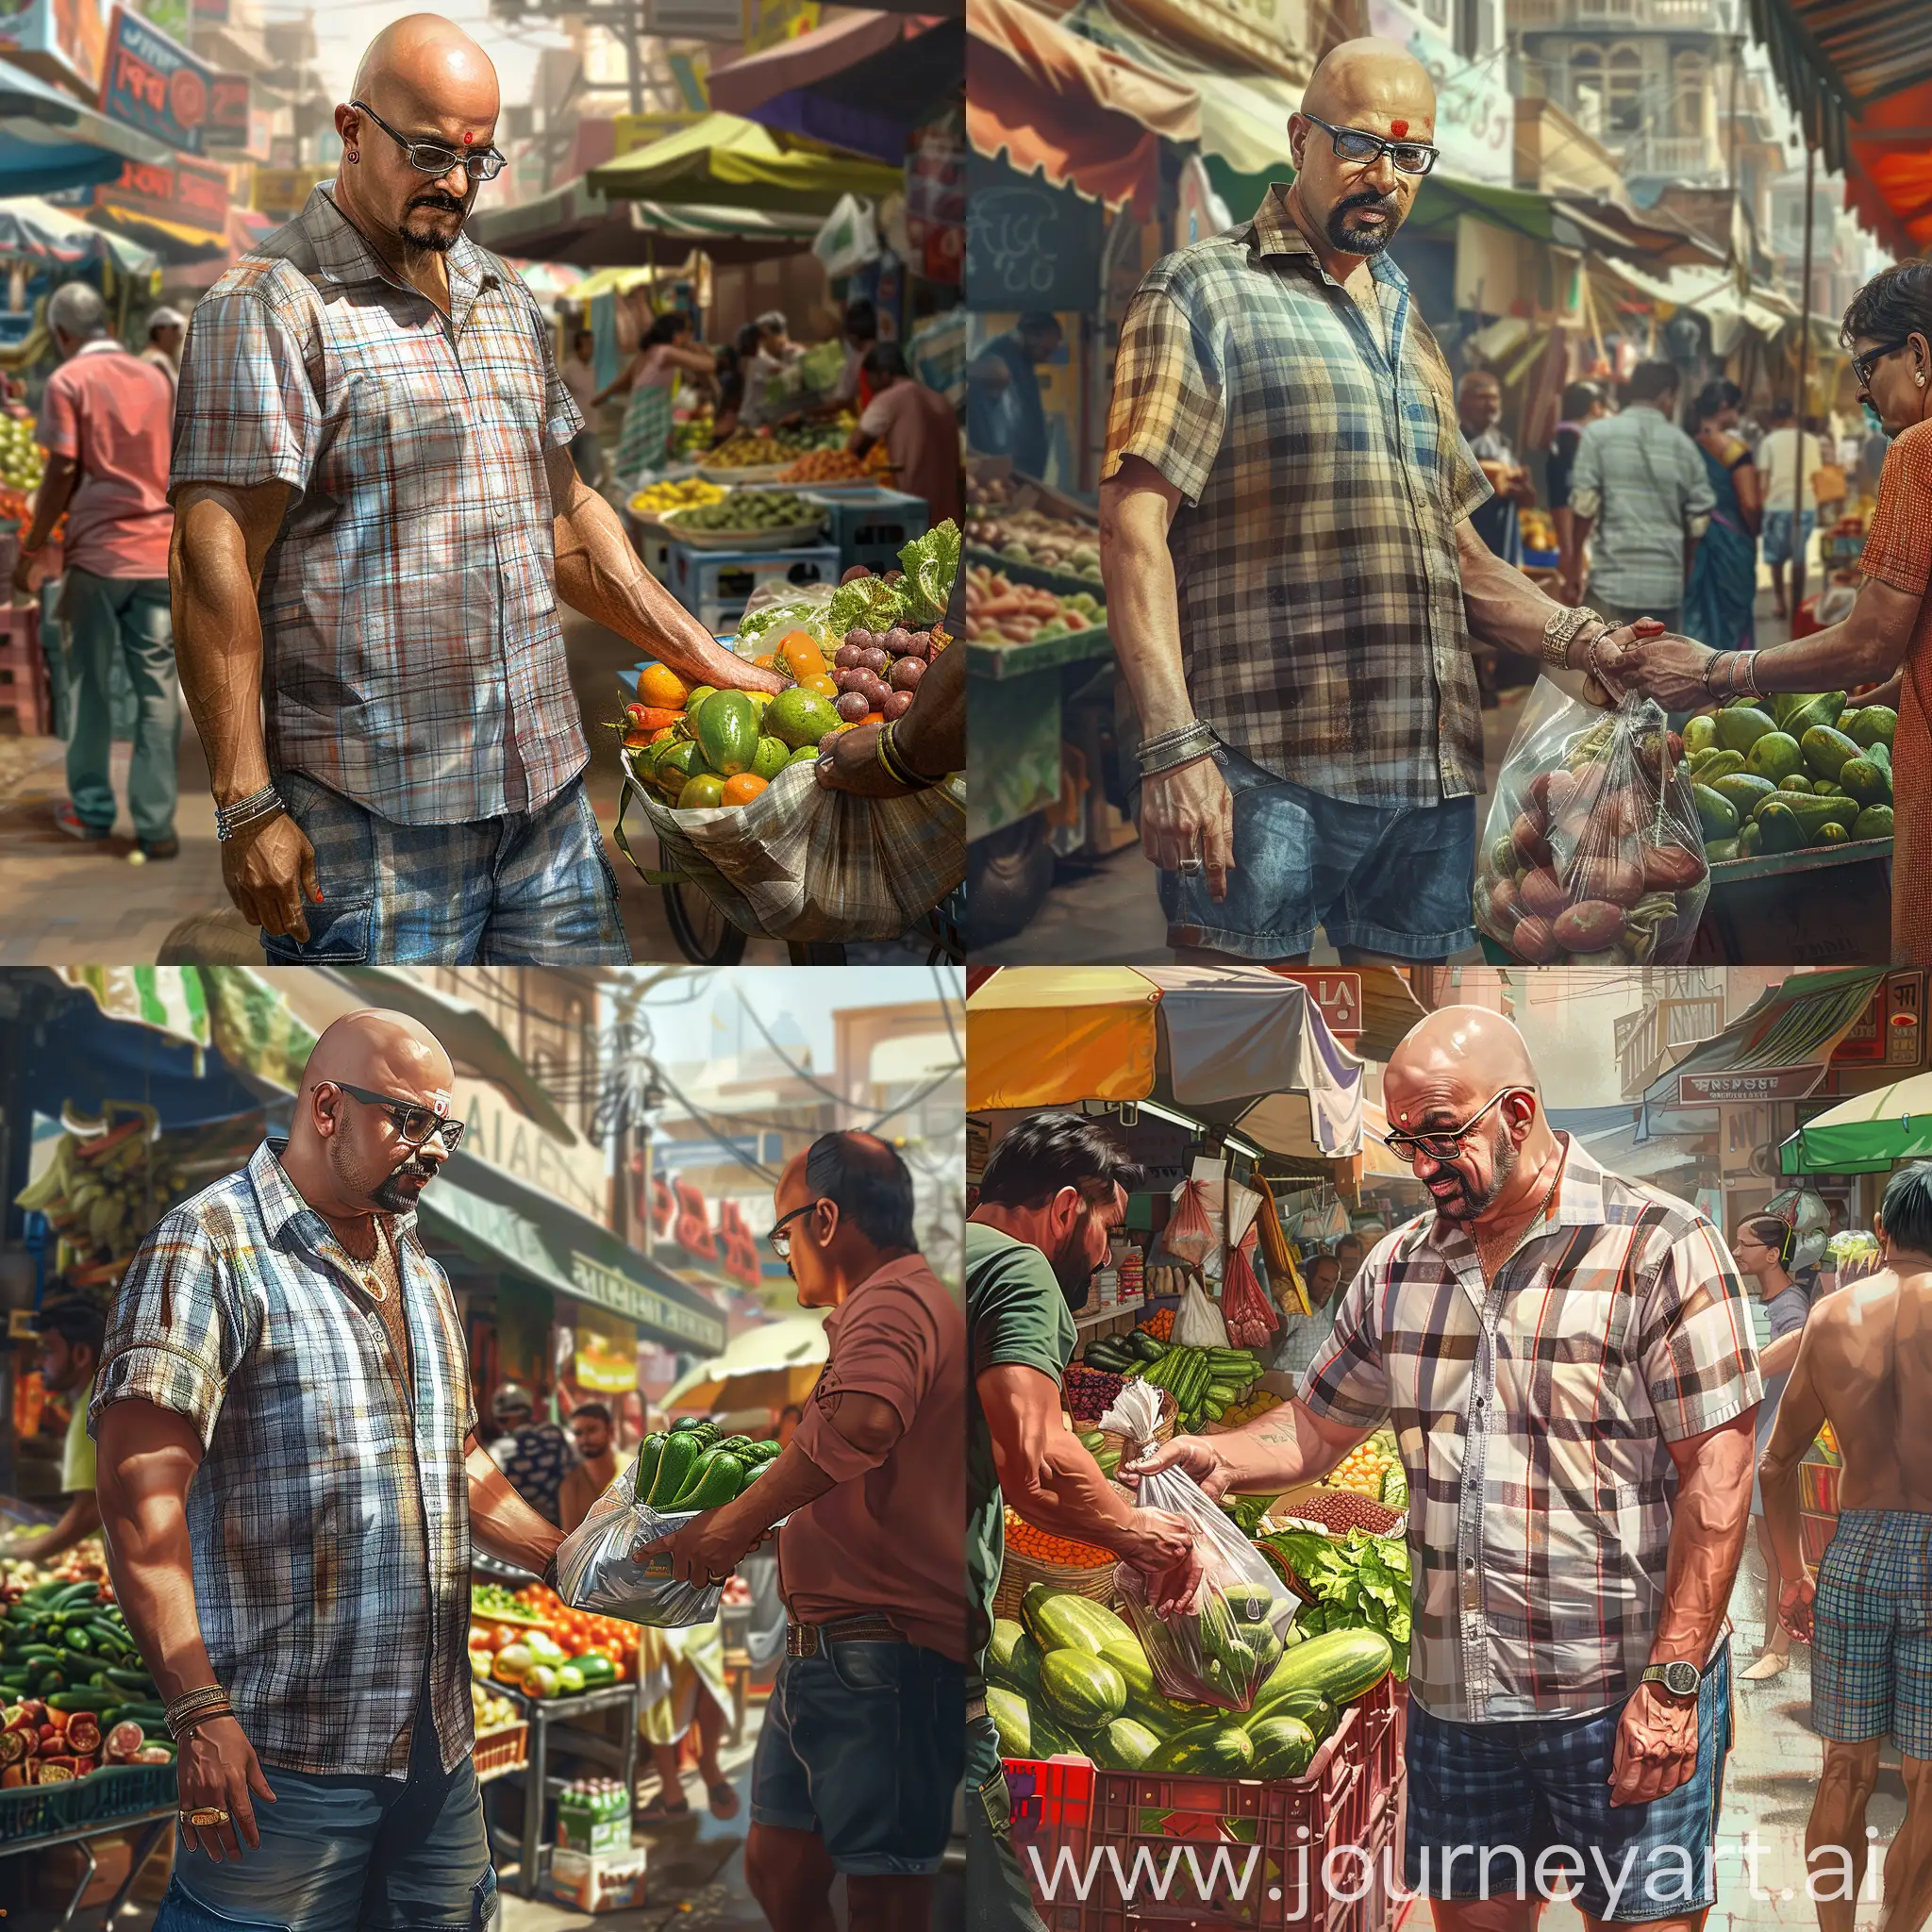 Create a photo-realistic image of a bald Indian man in his mid-30s buying groceries from a vendor in India. The man has a goatee and wears glasses with a steel frame. He is dressed in a checked shirt and jeans shorts. The setting is a bustling market in India, with colorful stalls and vendors in the background. The man appears engaged in conversation with the vendor, who is handing him a bag of fresh produce. The scene captures the vibrant atmosphere of an Indian market with attention to detail in clothing, facial features, and surroundings.